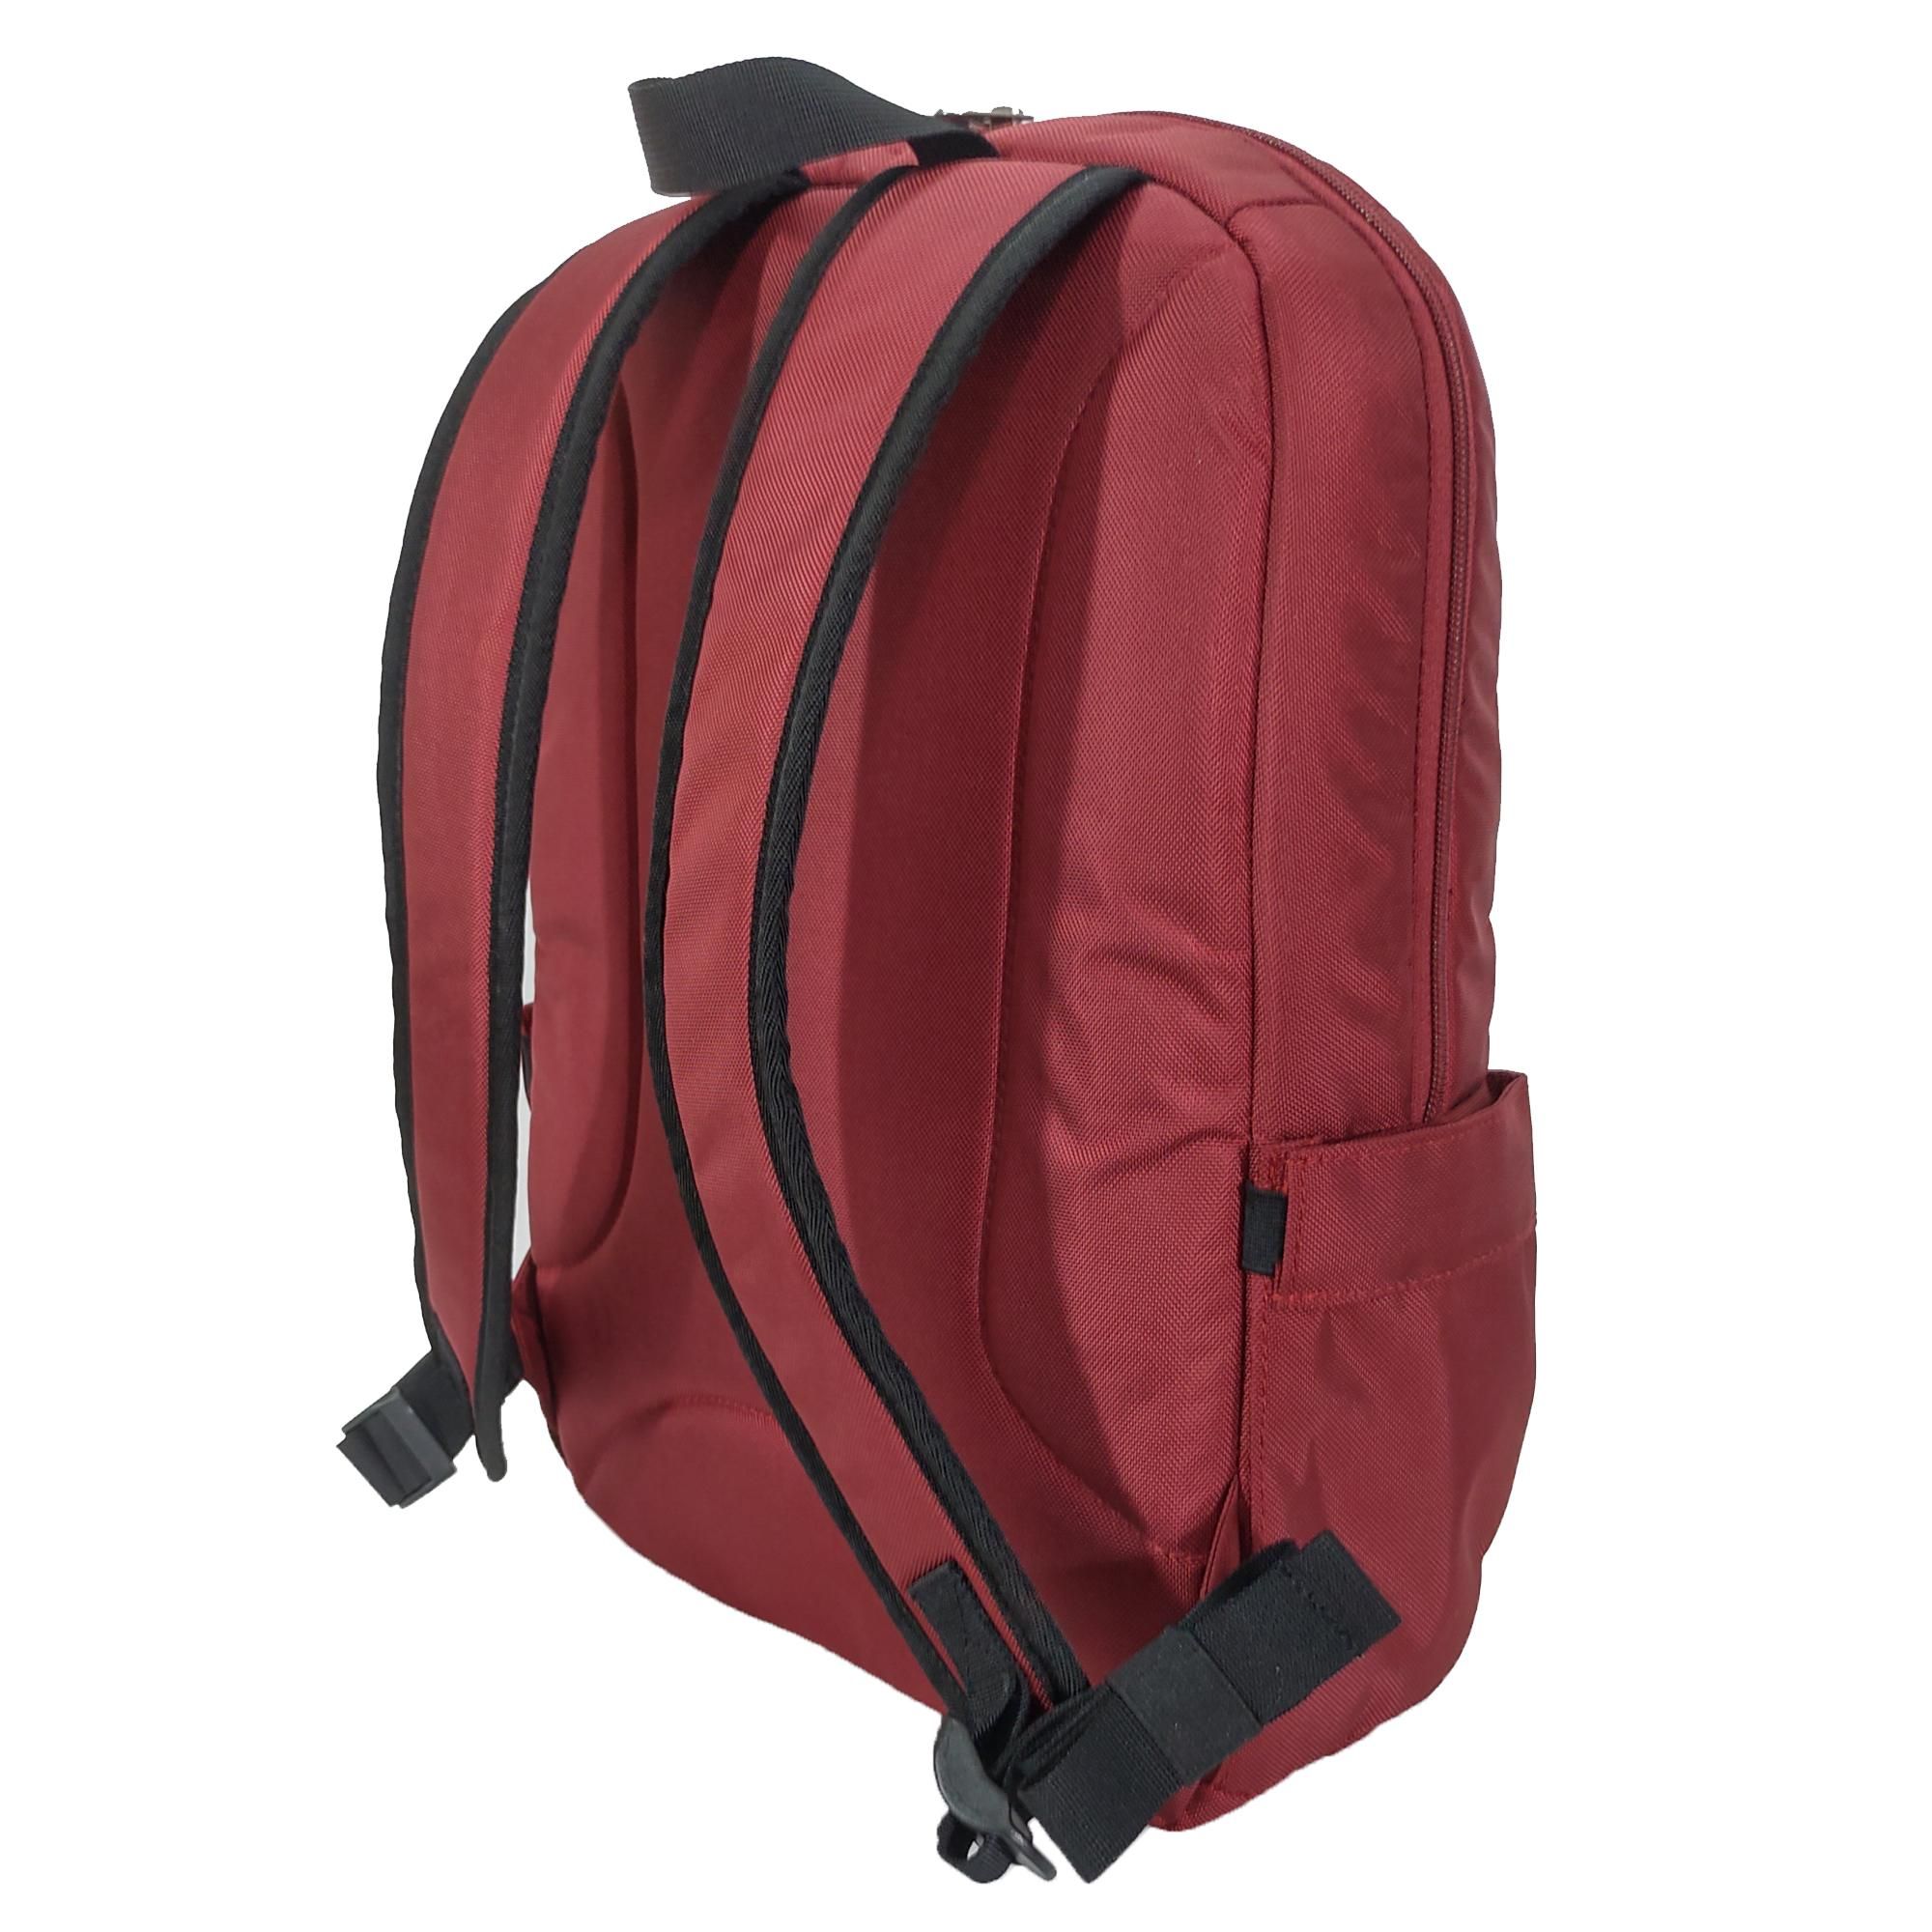  Balo UMO EVANKI BackPack D.Red- Balo Laptop Cao Cấp 